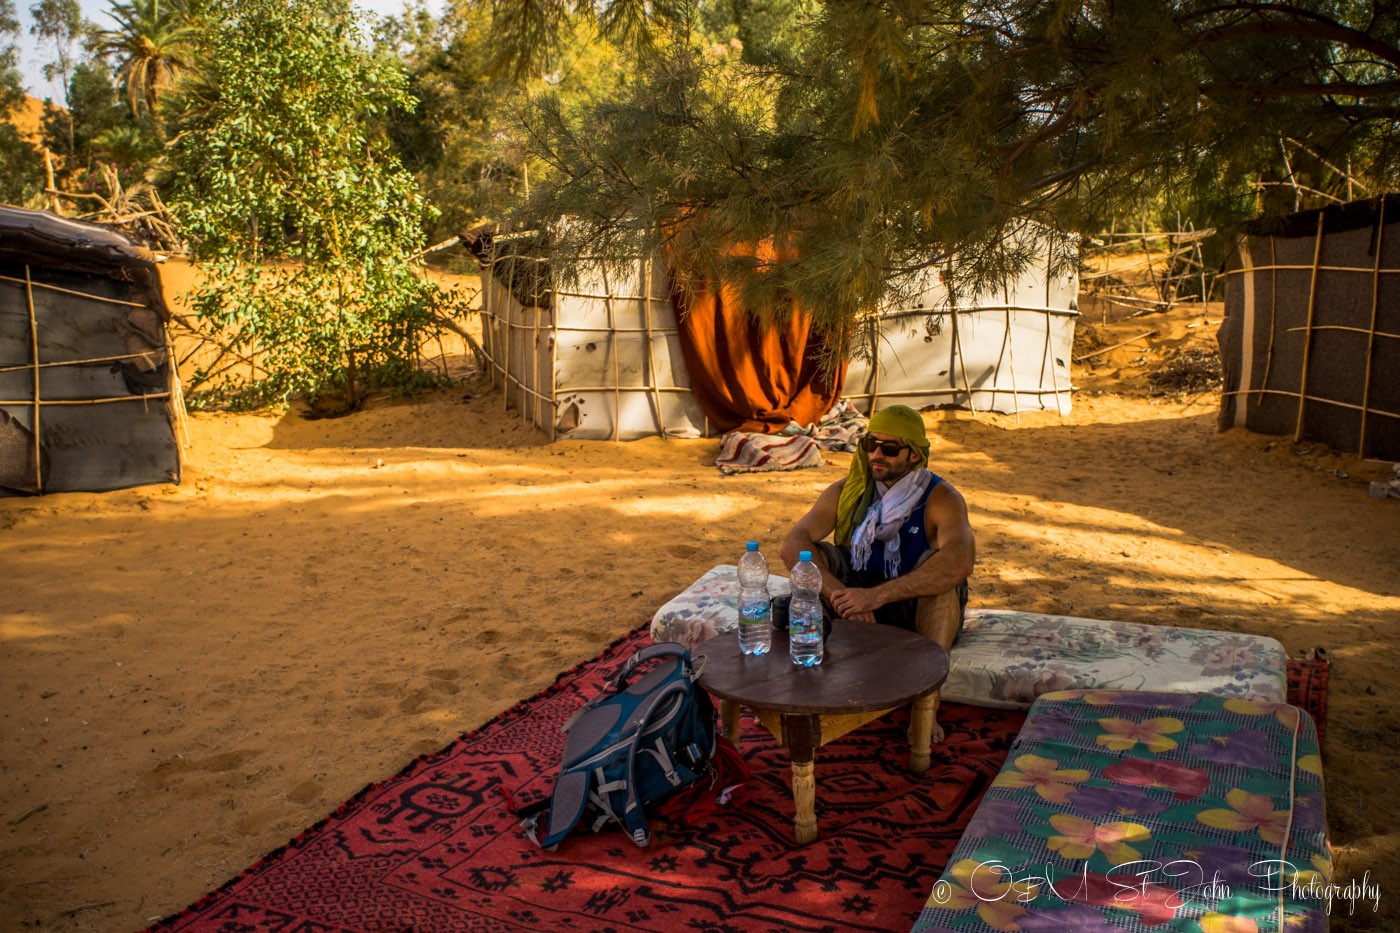 Max relaxing in the shade of the Oubira Oasis. Erg Chebbi. Sahara Desert. Morocco